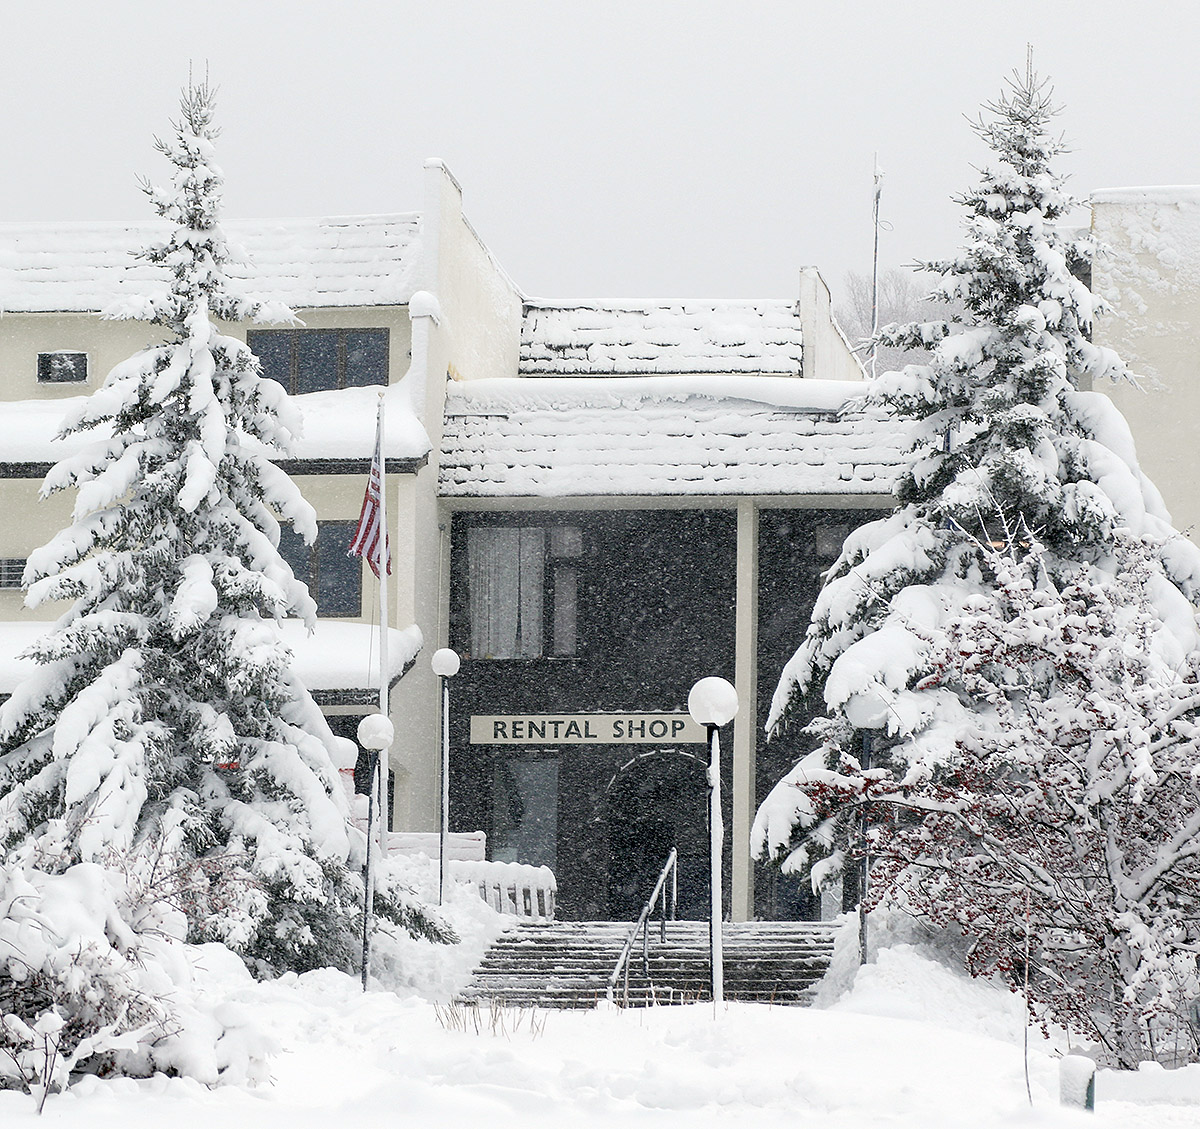 An image of heavy snowfall and snow accumulations at the main base lodge in the Village during an early December snowstorm at Bolton Valley Ski Resort in Vermont